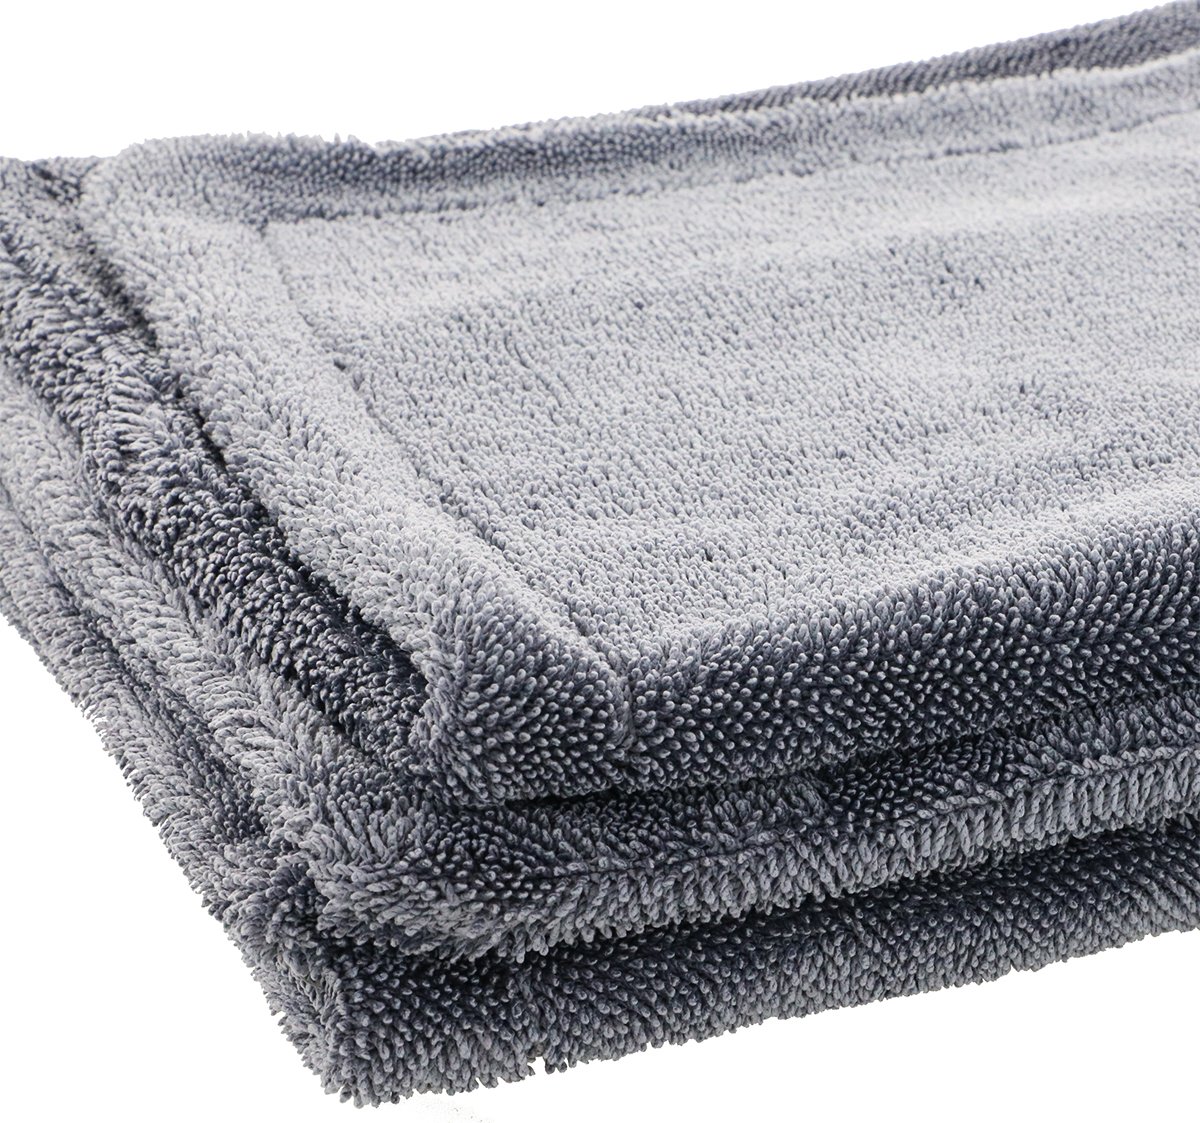 Double Layered Drying Towel